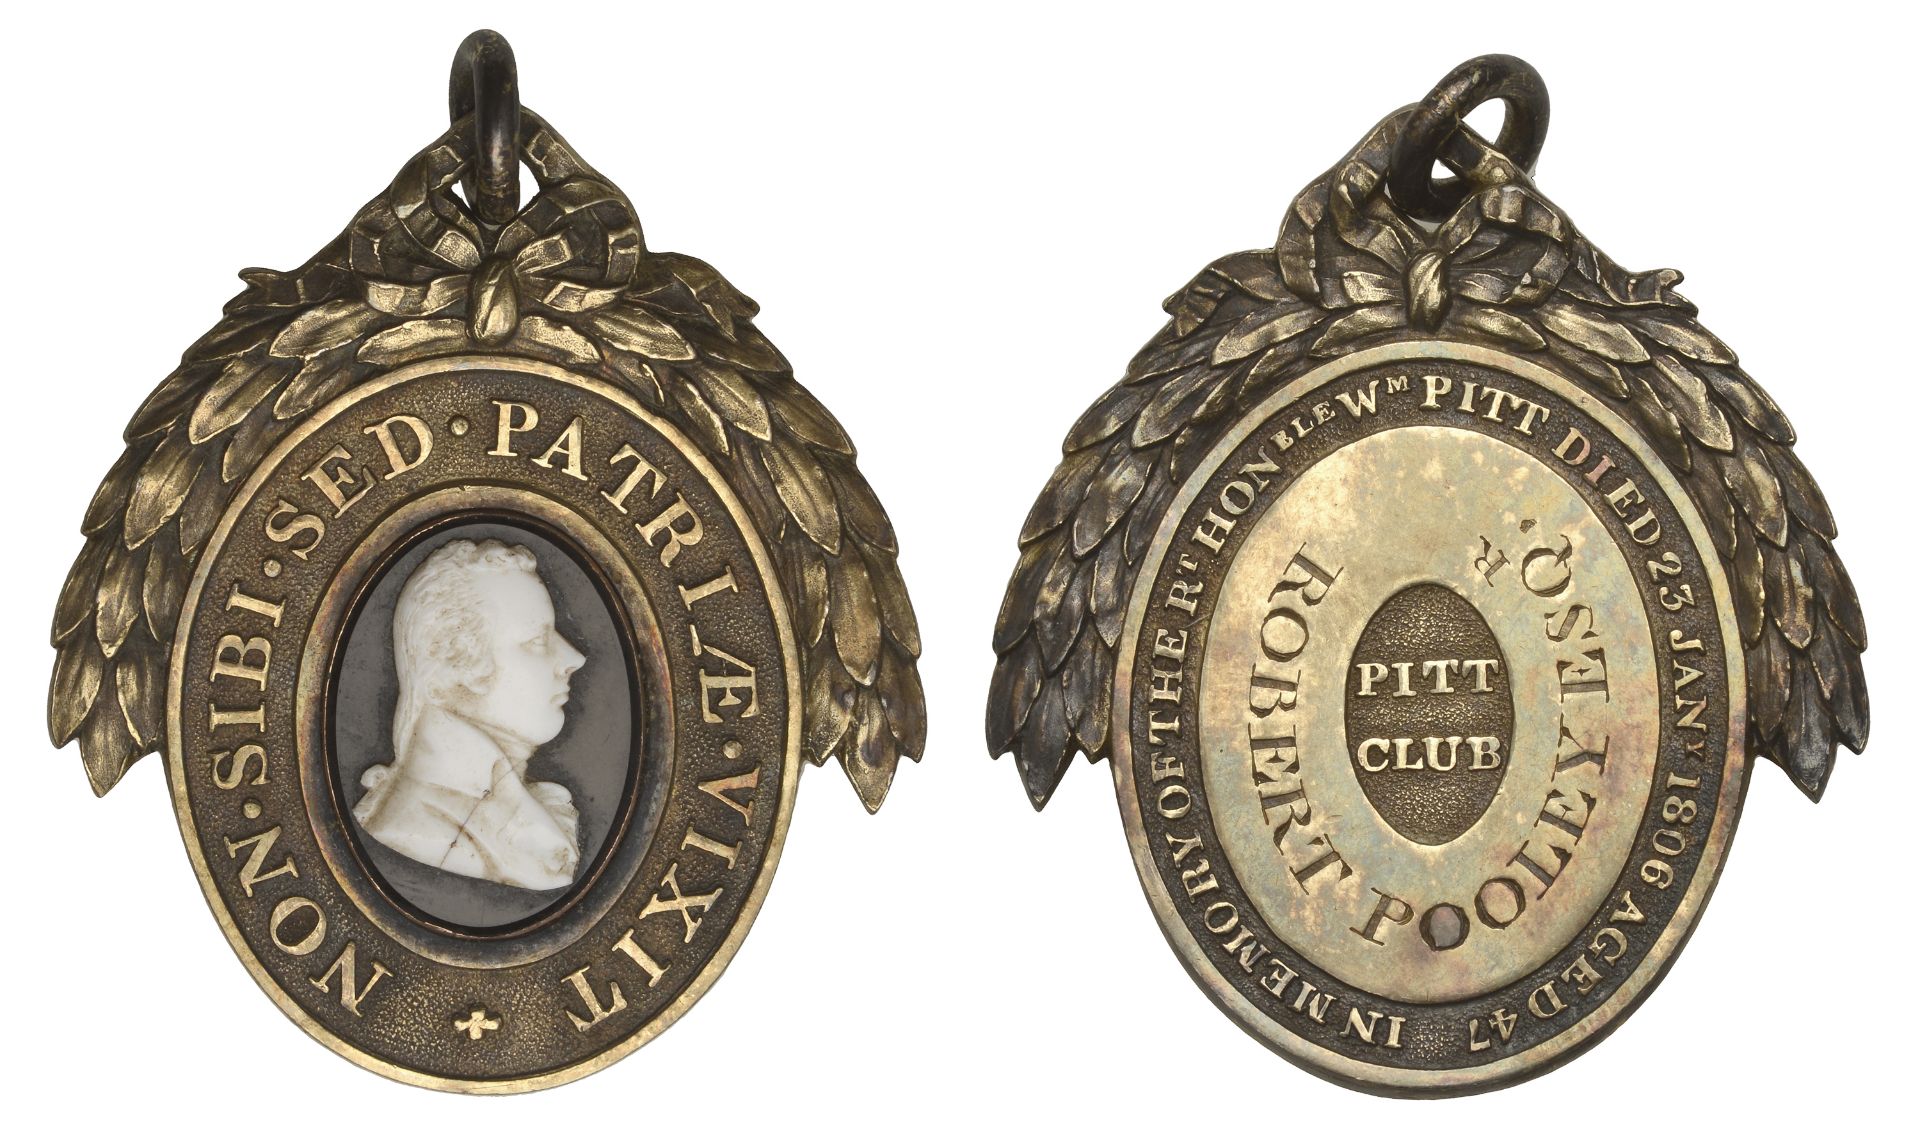 London Pitt Club, an oval silver-gilt member's badge, c. 1810-15, cameo portrait of William...